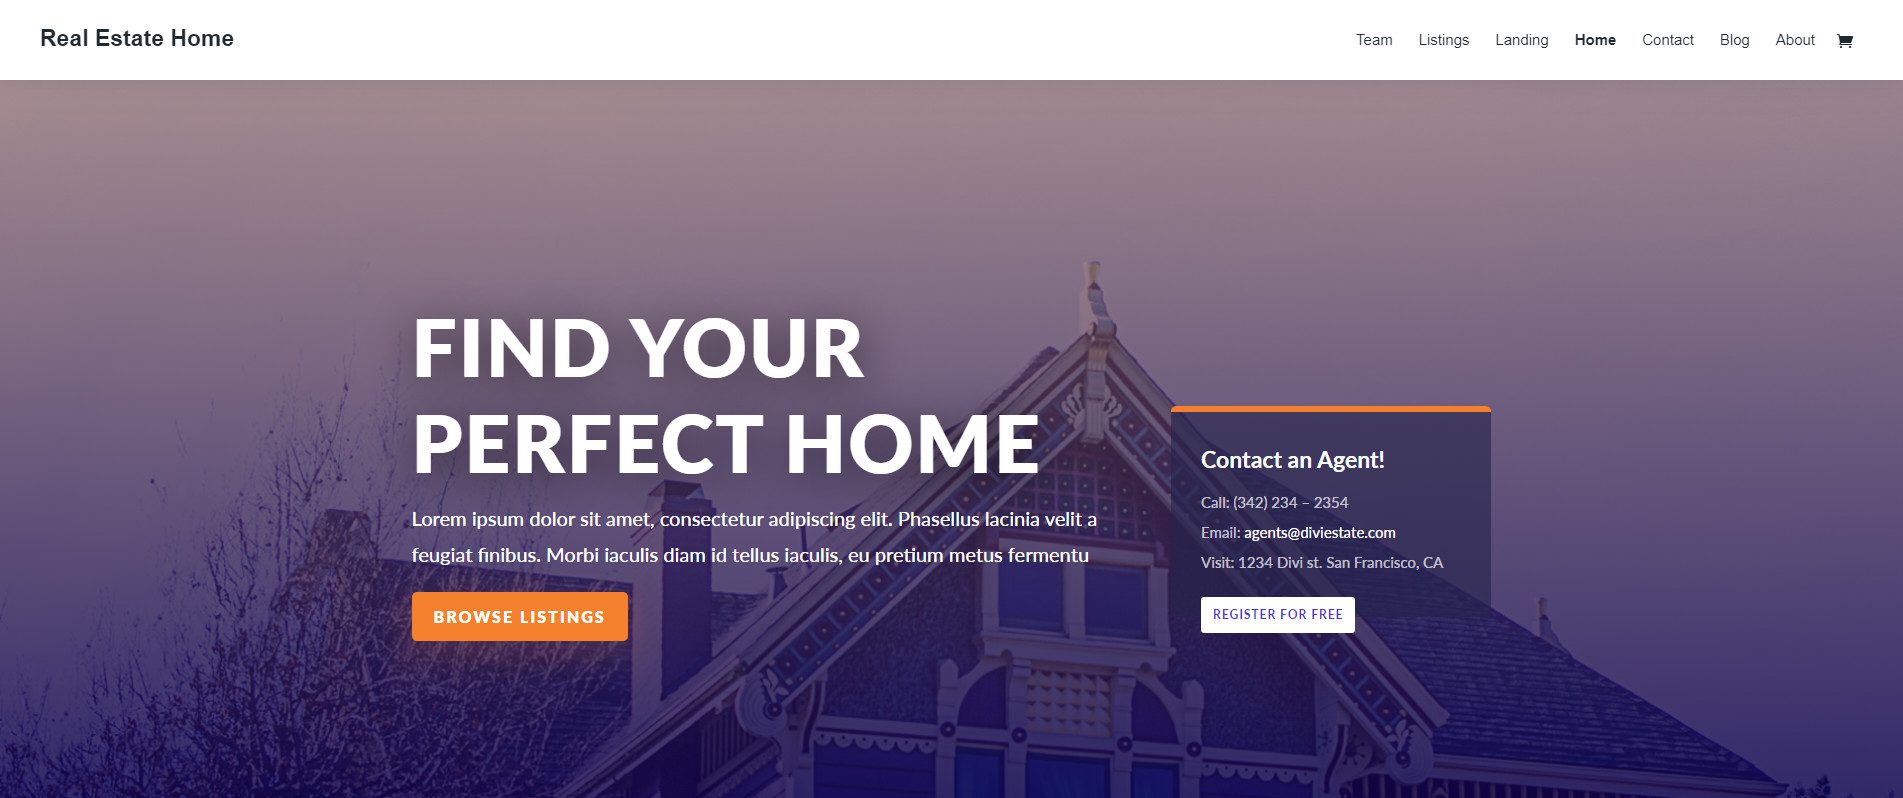 Divi Real Estate Layout Pack - Homepage